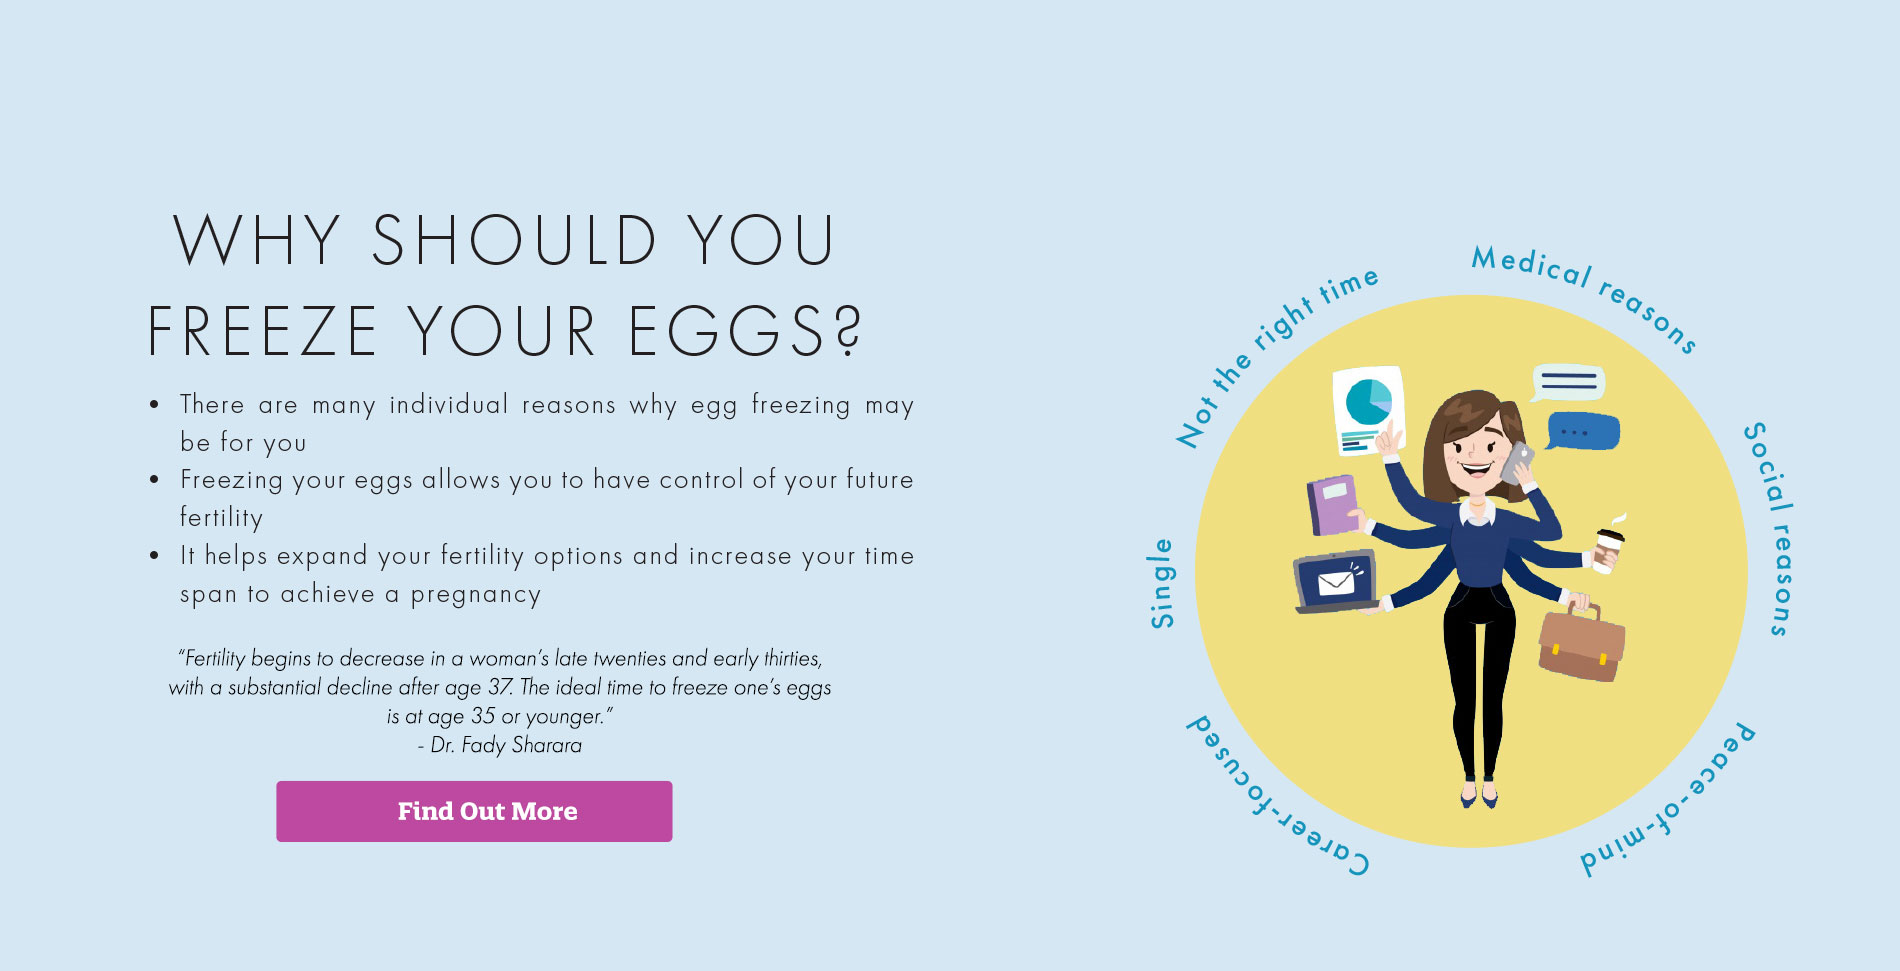 When Should You Freeze Your Eggs?